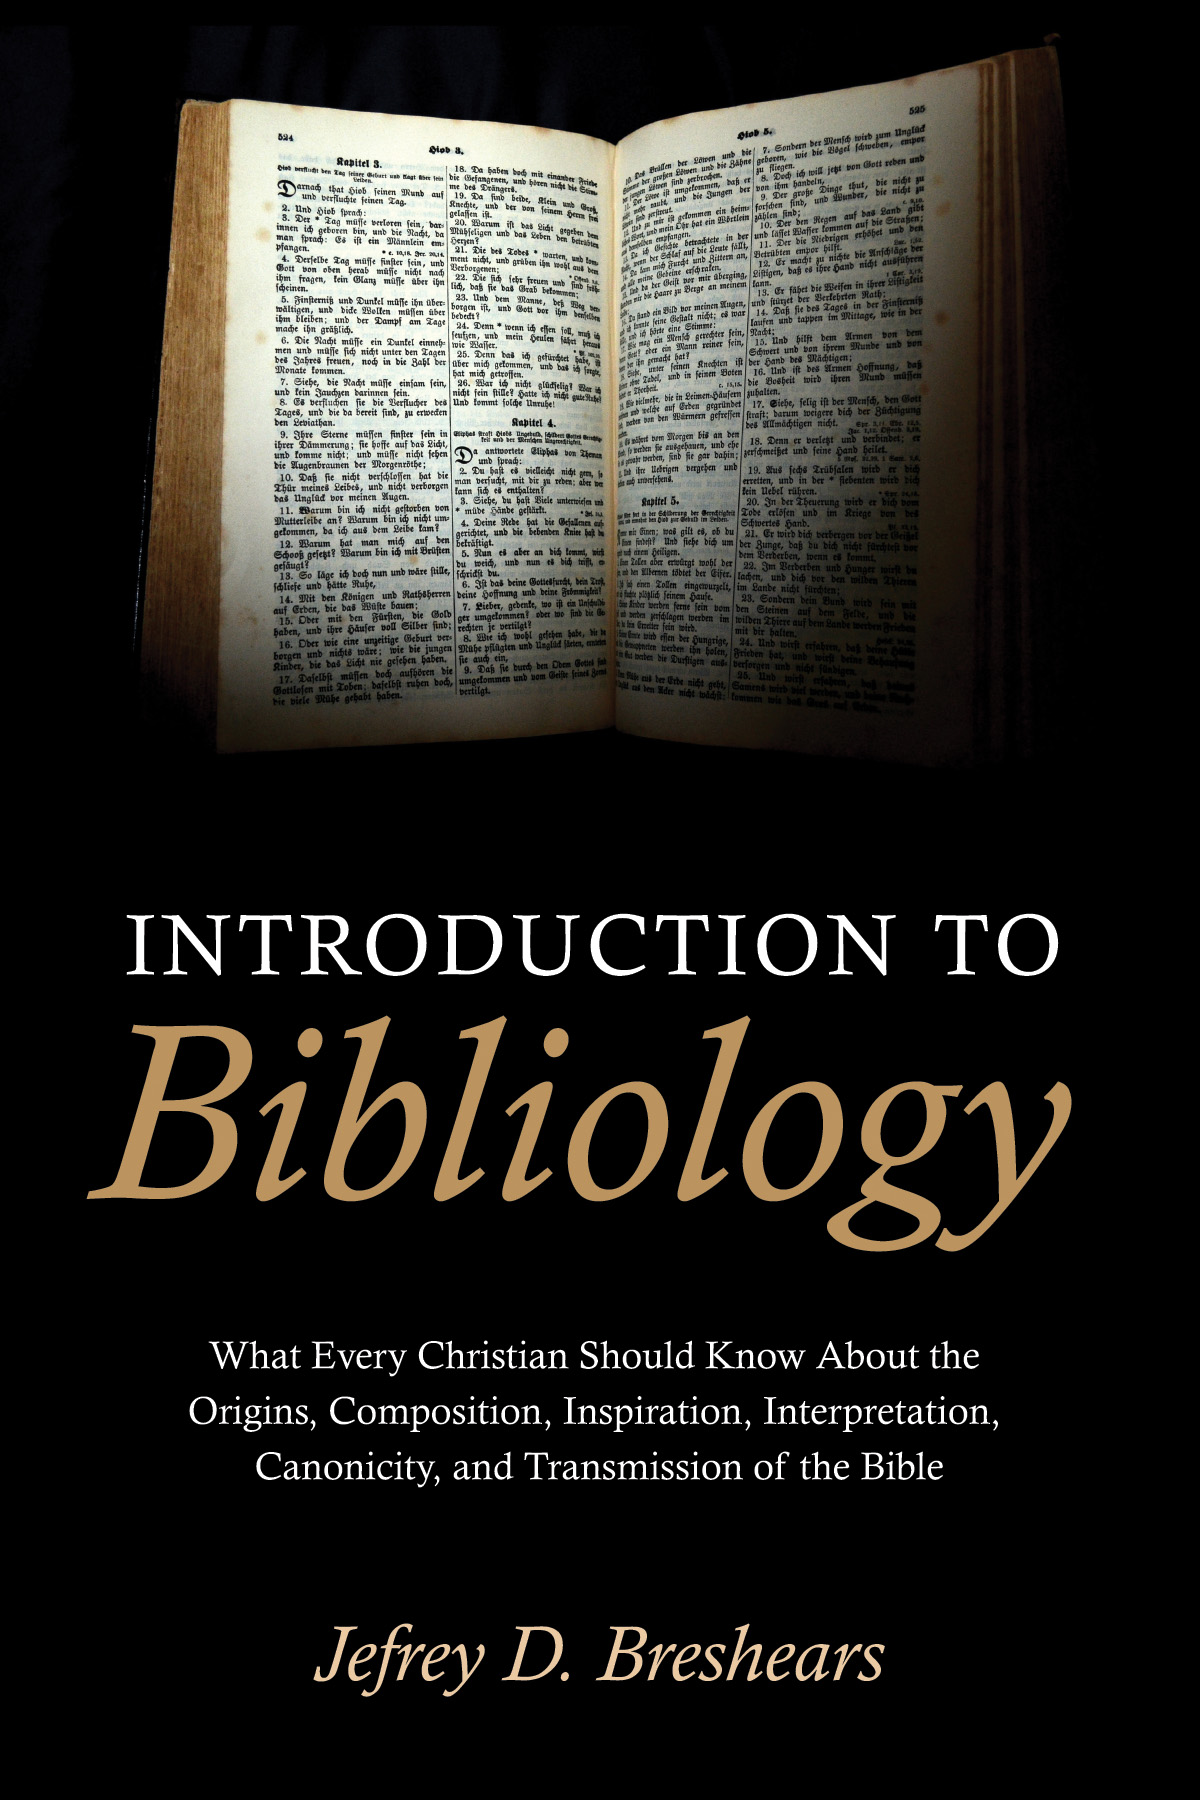 Introduction To Bibliology: What Every Christian Should Know About the Origins, Composition, Inspiration, Interpretation, Canonicity, and Transmission of the Bible